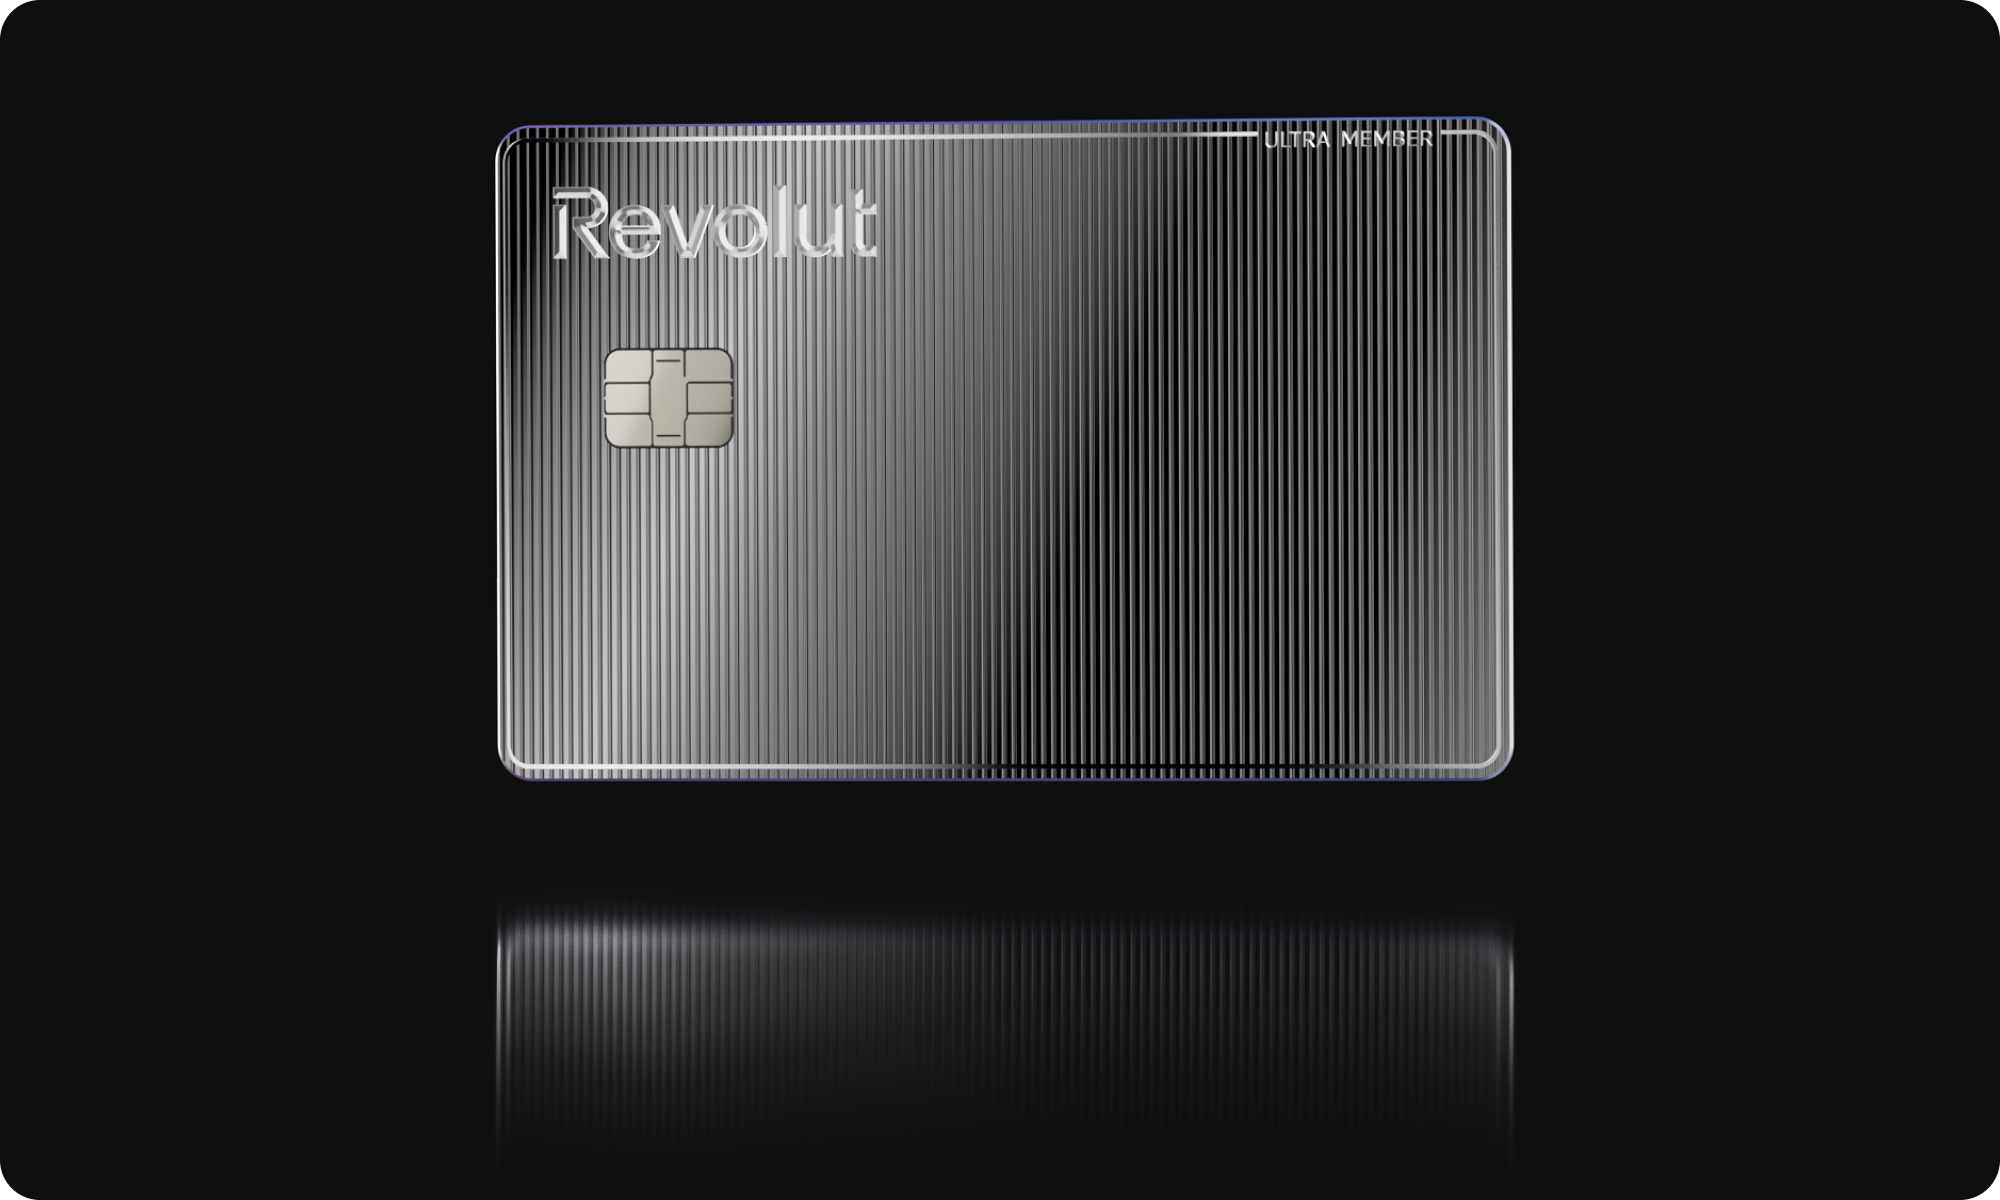 The platinum-plated card